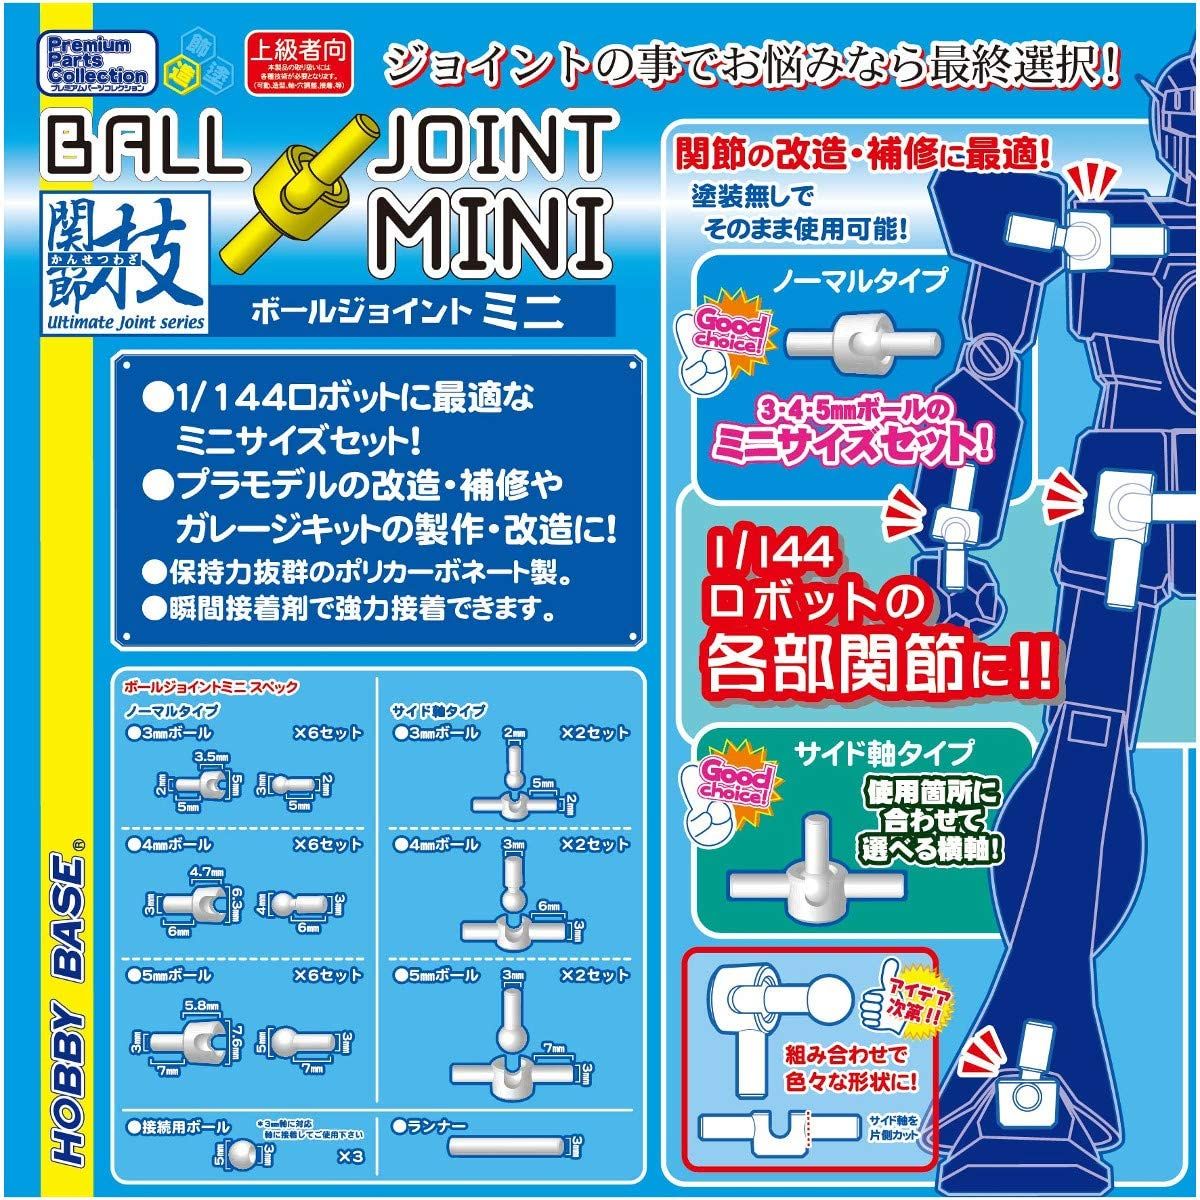 Hobby Base PPC-Tn70 Ultimate Joint Series Ball Joint Mini Clear - BanzaiHobby